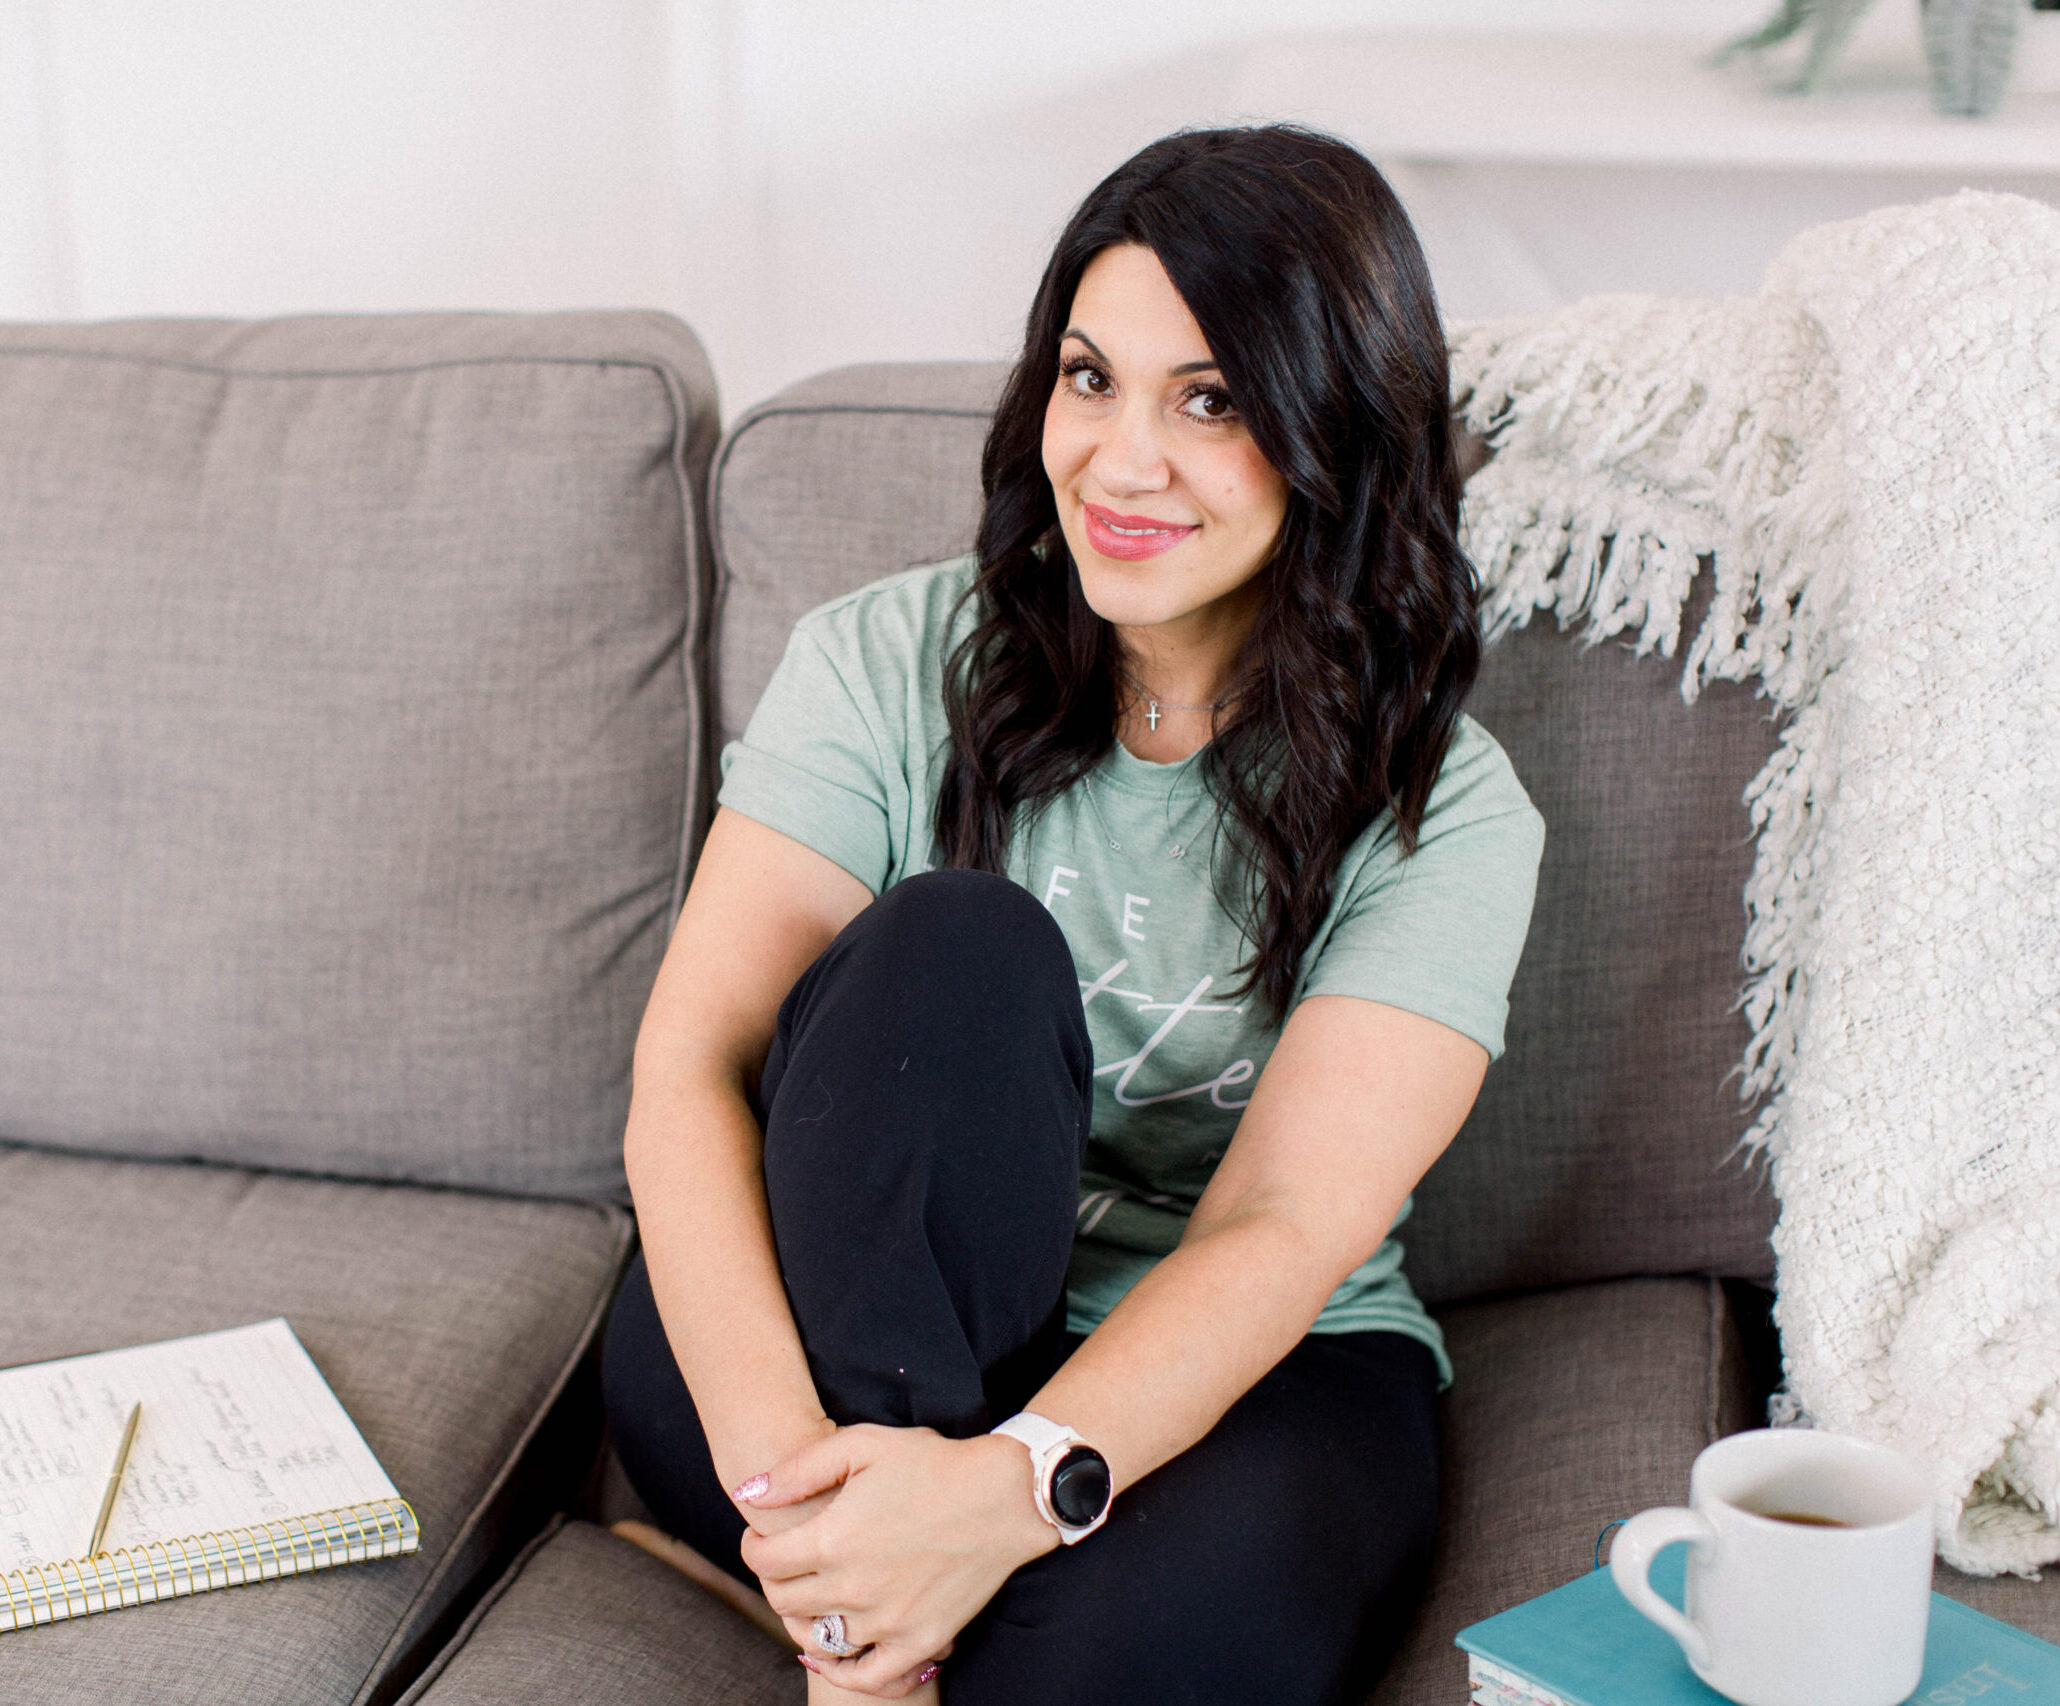 dark haired woman sitting on a couch with her right knoee drawn up to her chest. She is wearin a light green t-shirt and black slacks. Next to her is a notebook and pen on one side and a cup of coffee on the other. She is smiling at the camera.